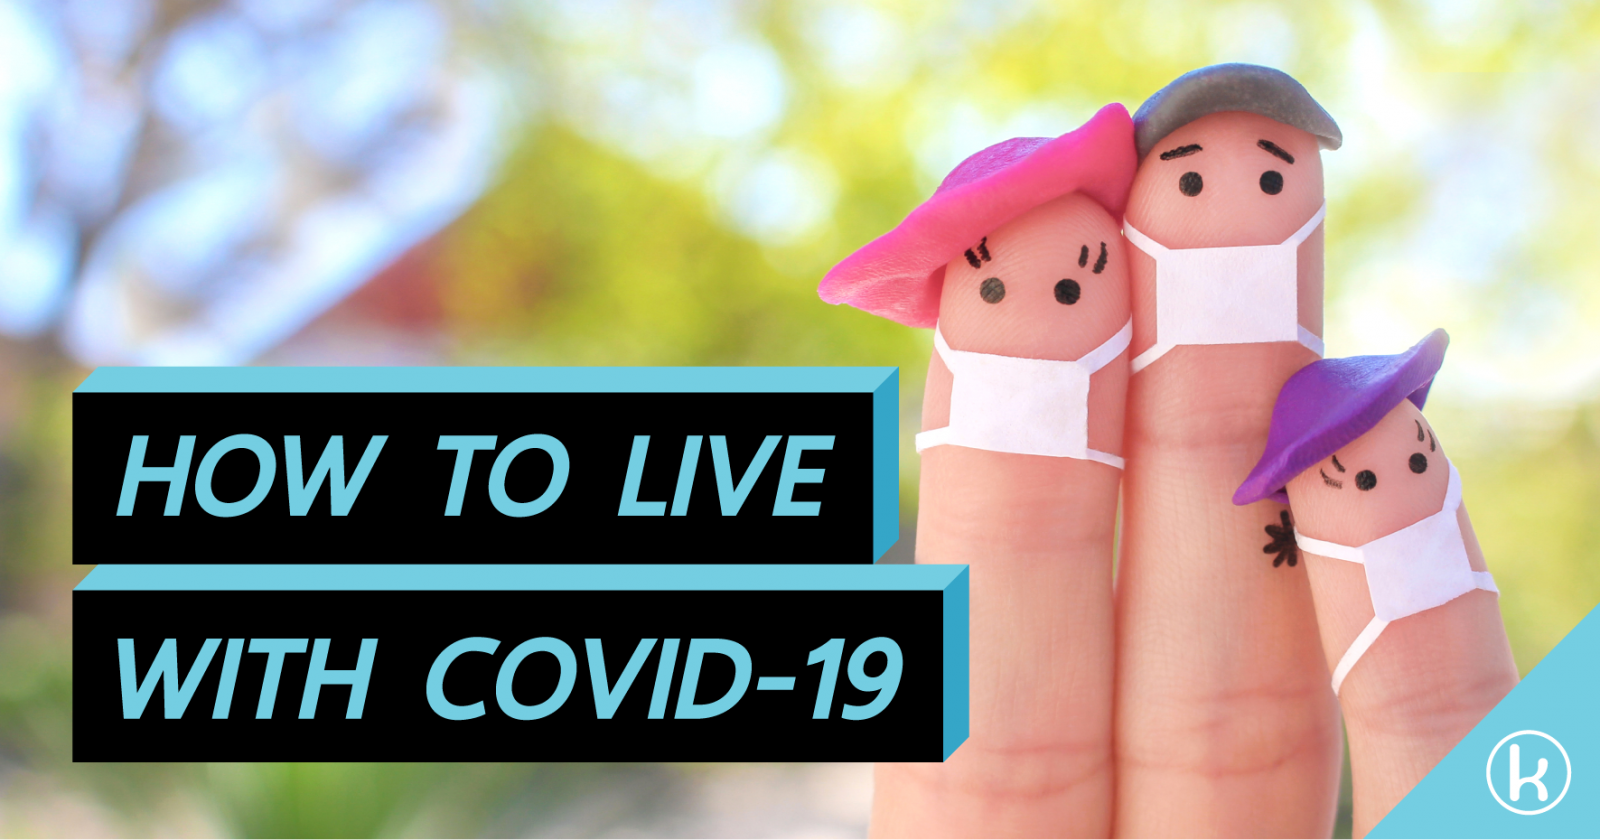 HOW TO LIVE WITH COVID-19